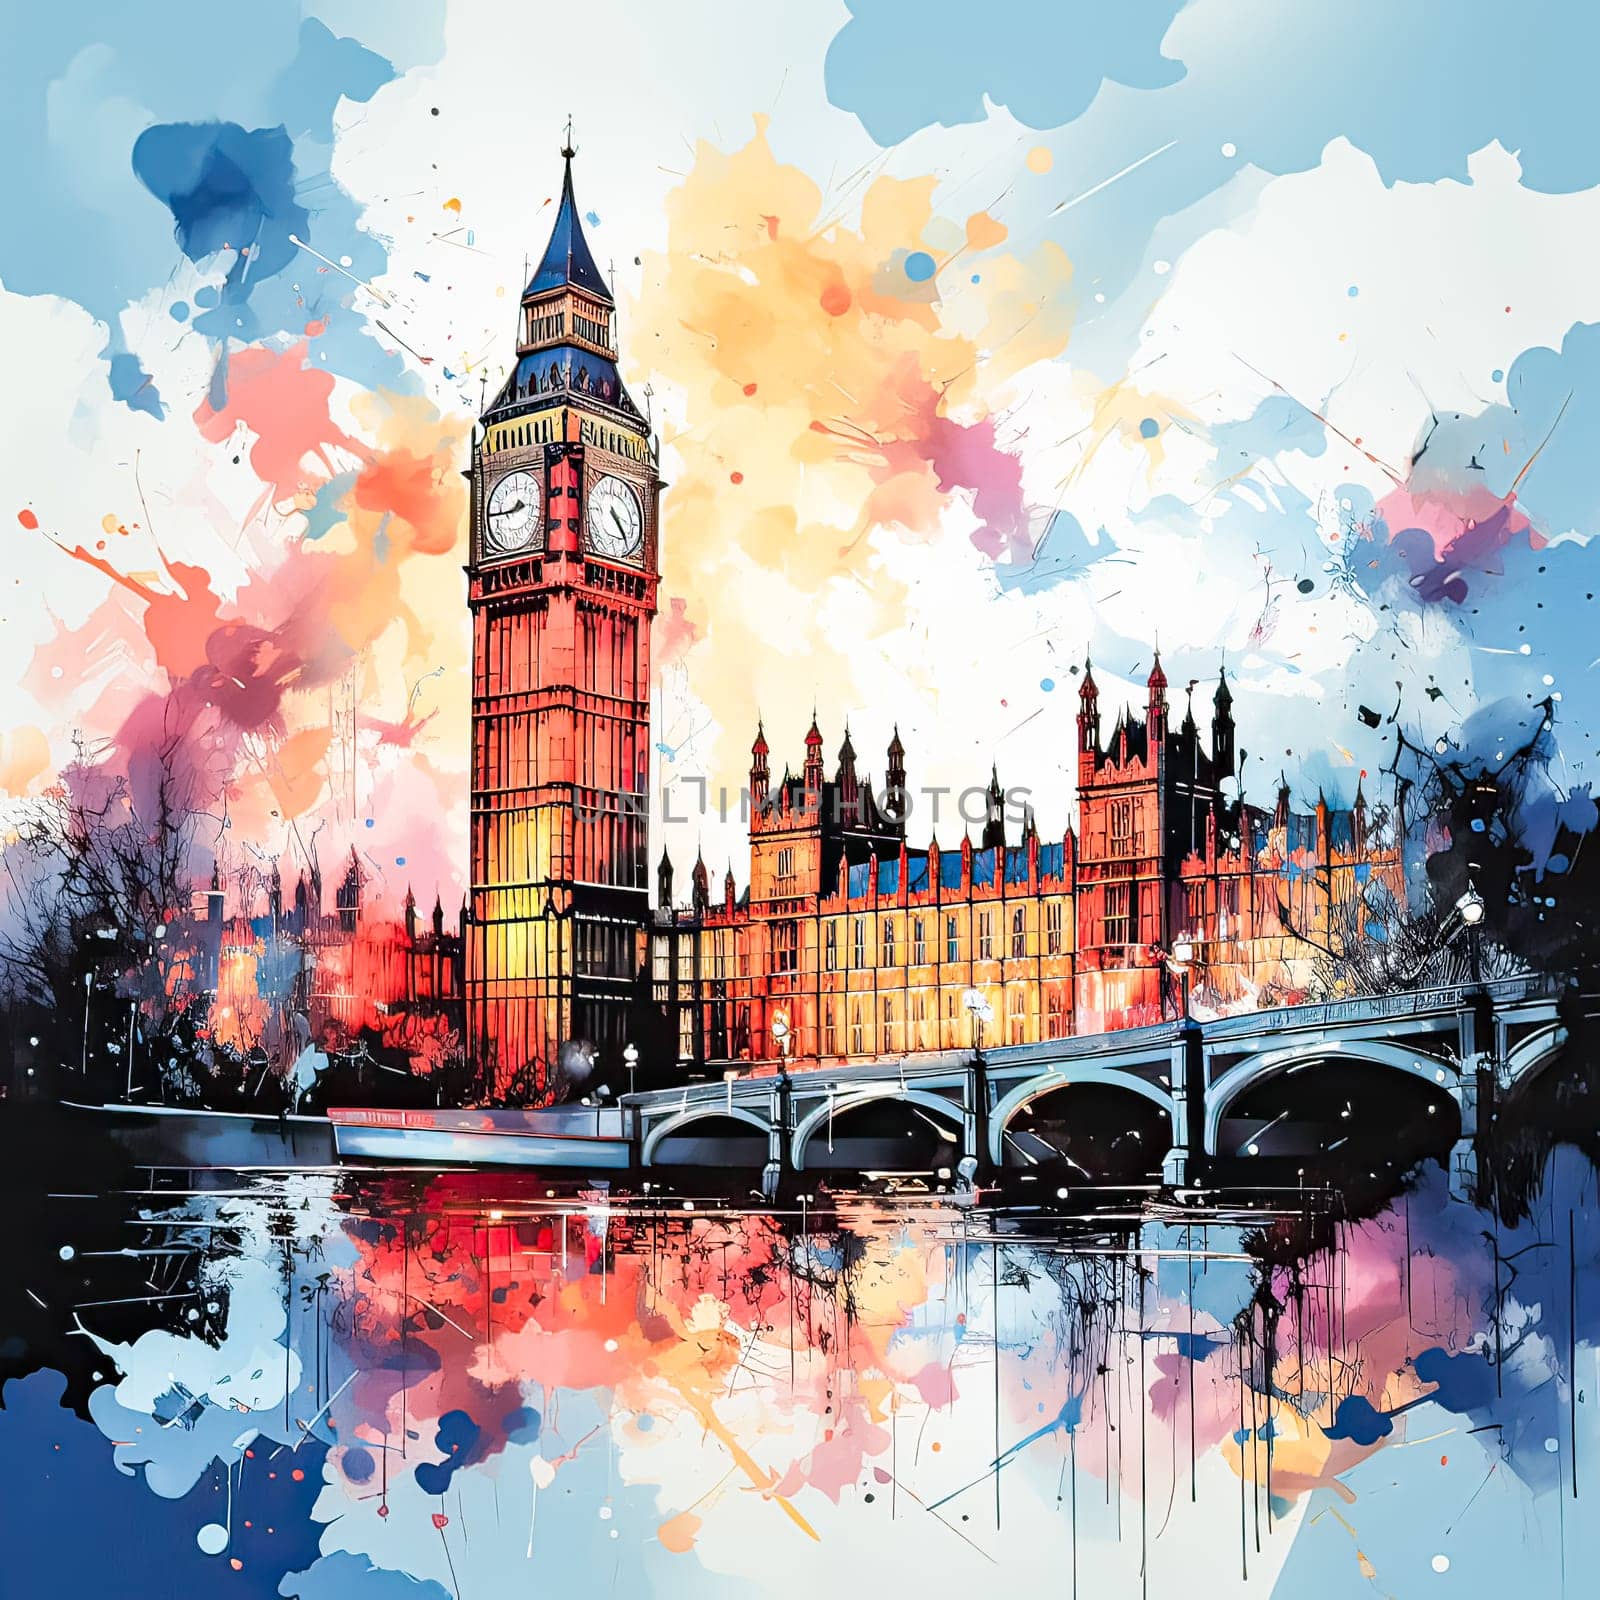 Sunsets embrace in watercolor Big Ben stands tall, an iconic silhouette against a vibrant sky, capturing Londons timeless allure and evening grace